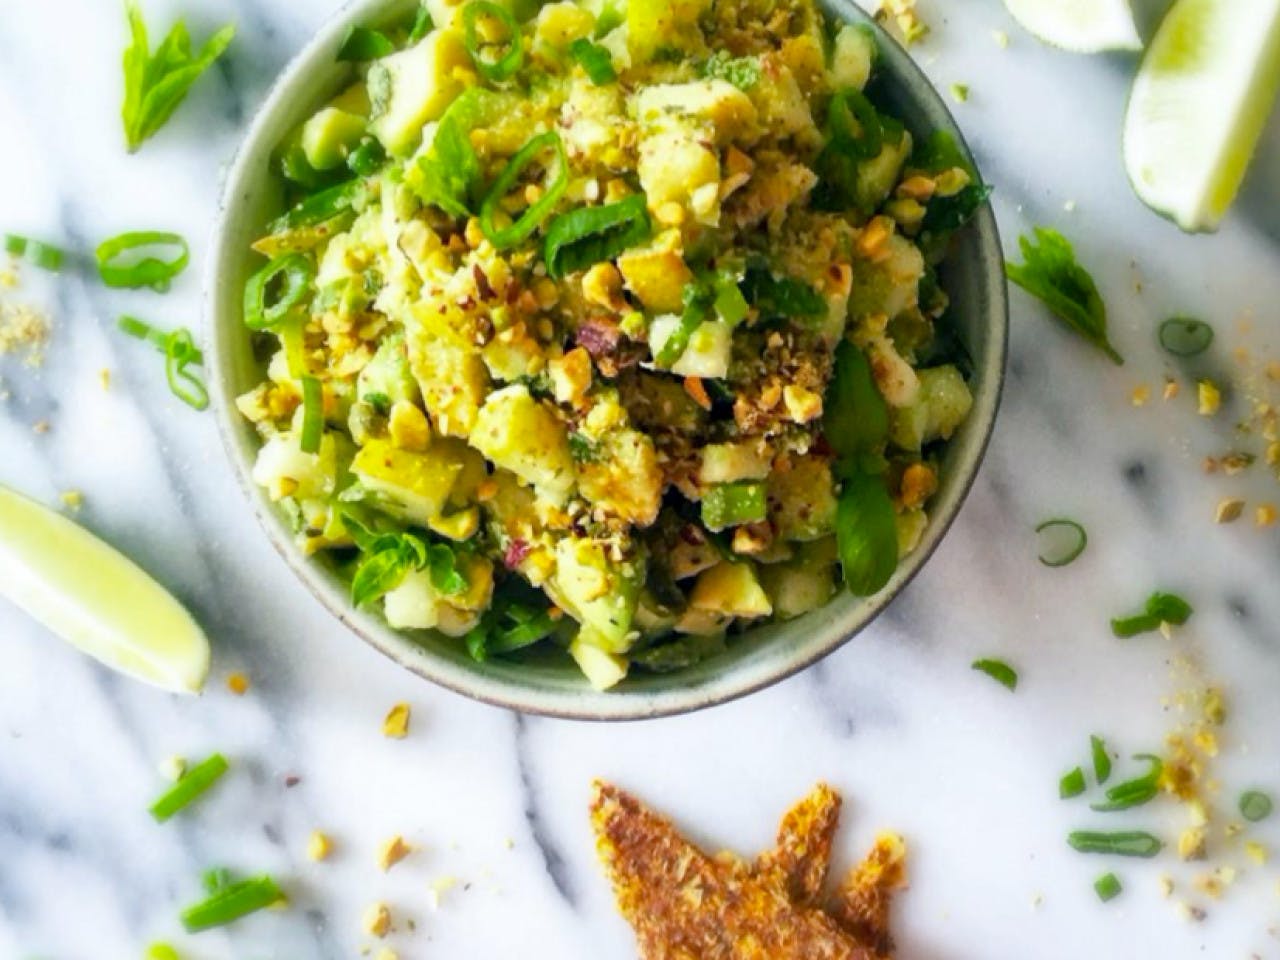 Avocado Salsa with Pear and Pistachio